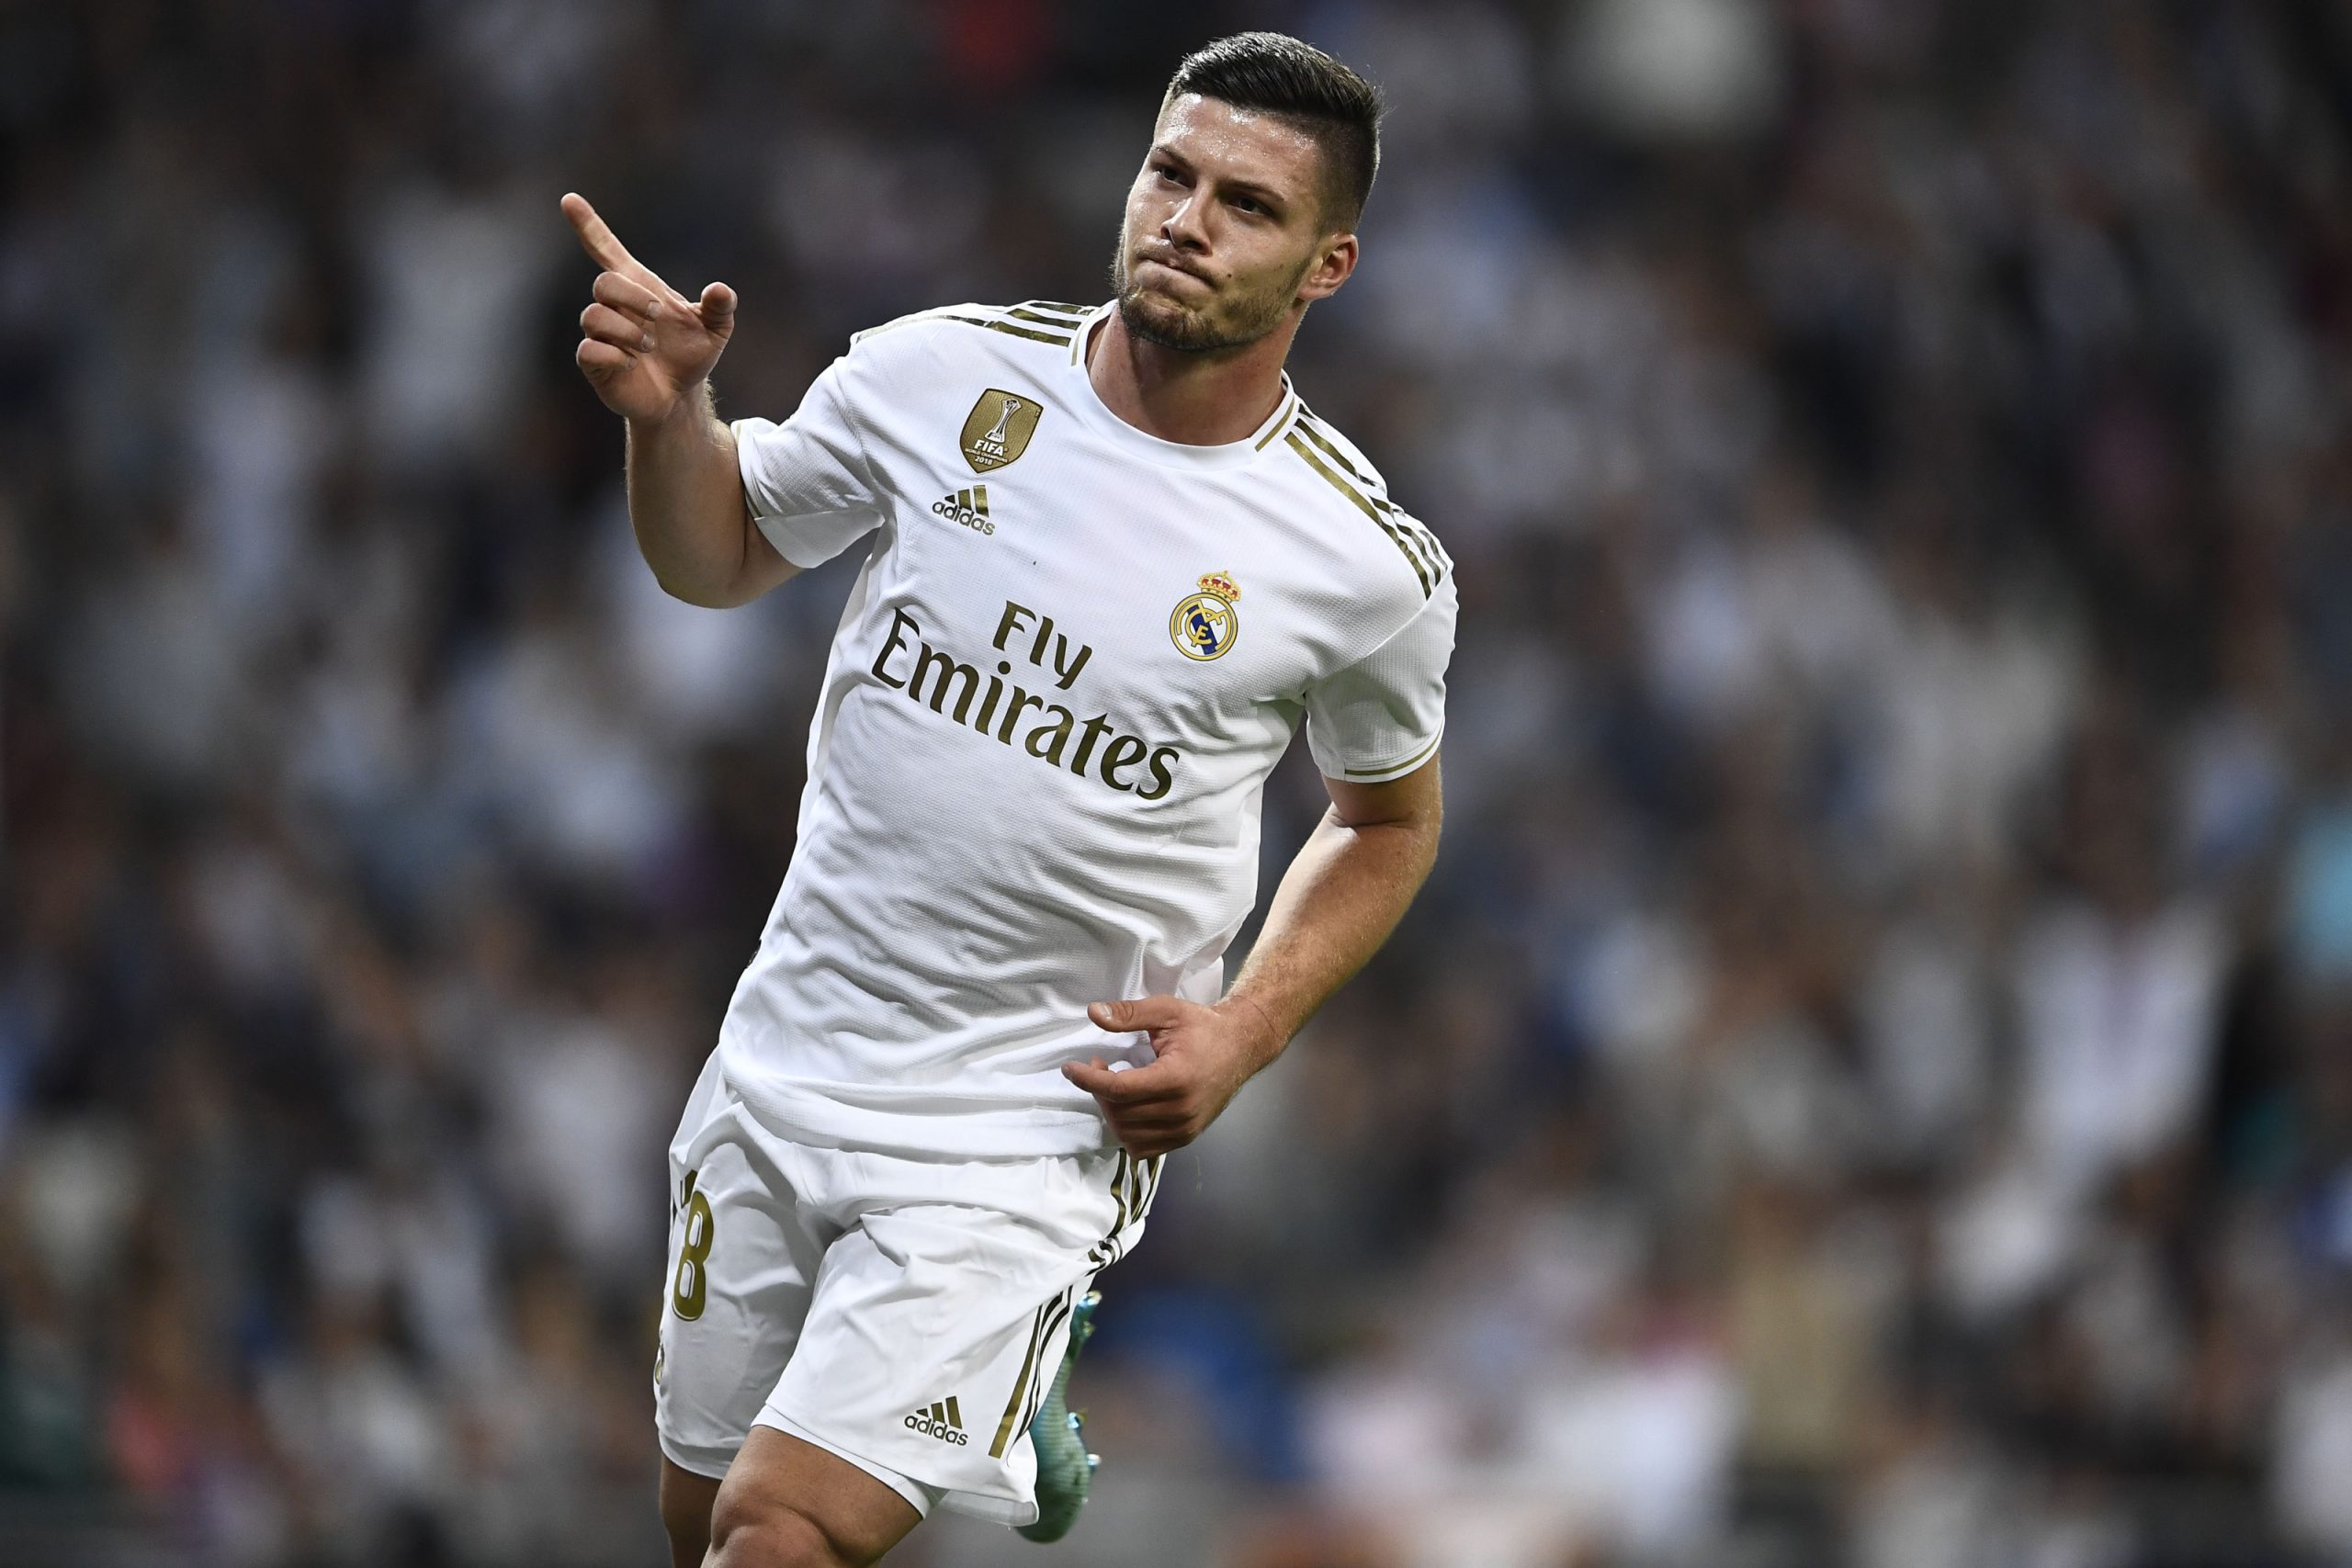 Chelsea target Luca Jovic in action for Real Madrid. (Credit: OSCAR DEL POZO/AFP via Getty Images)